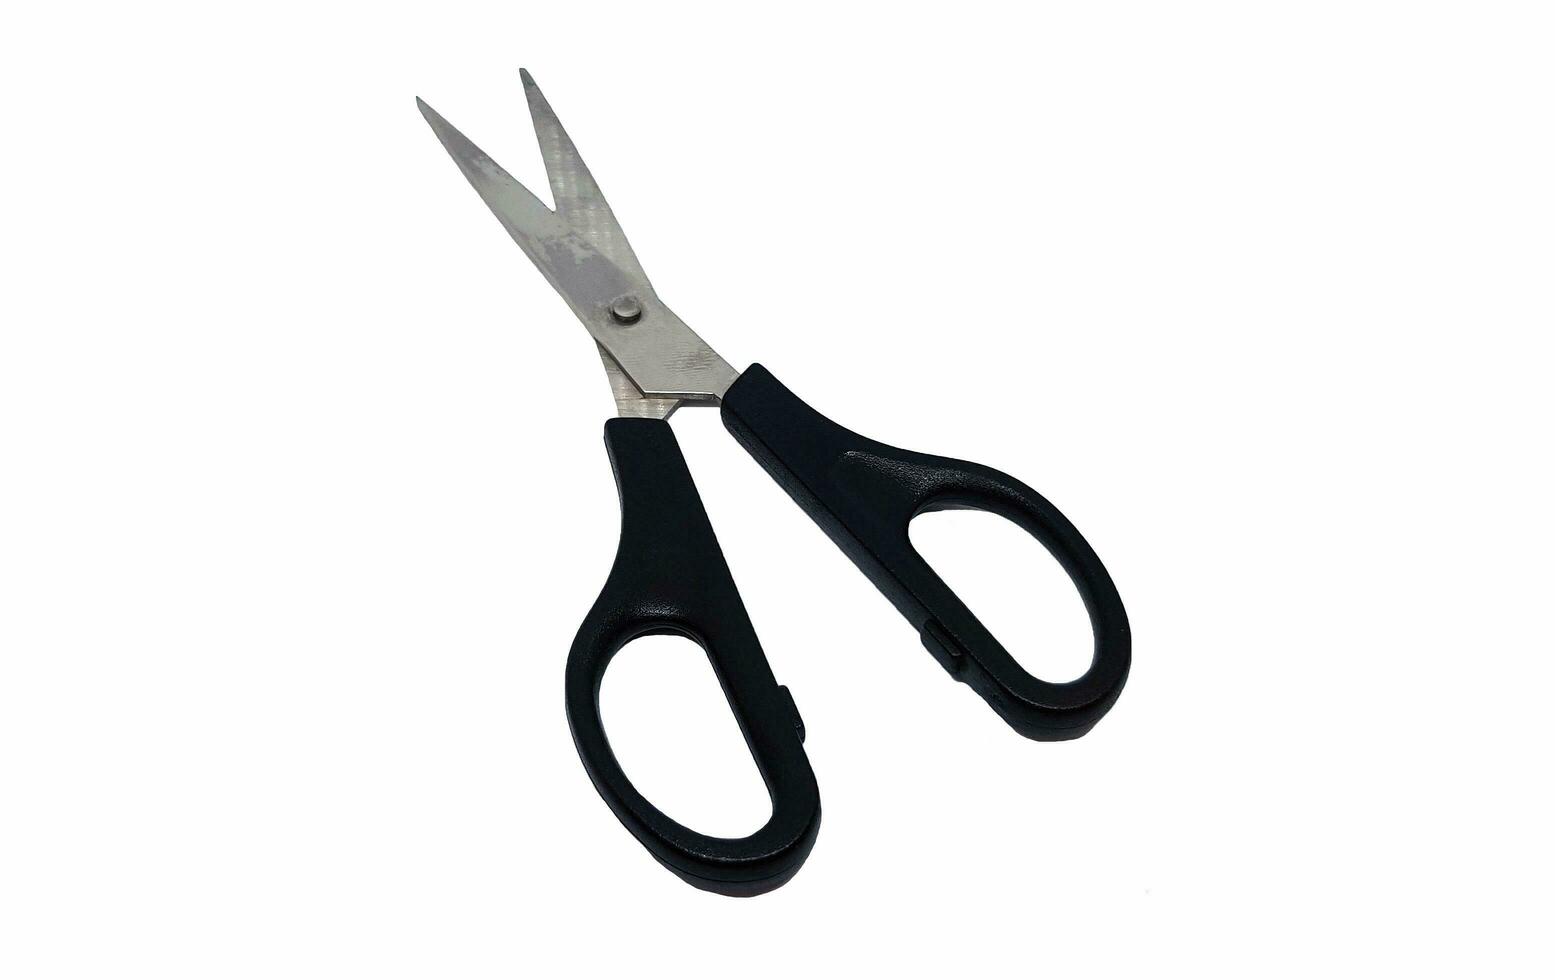 Black scissors isolated on white background with clipping path. Used tool, Old equipment and Sharp object photo